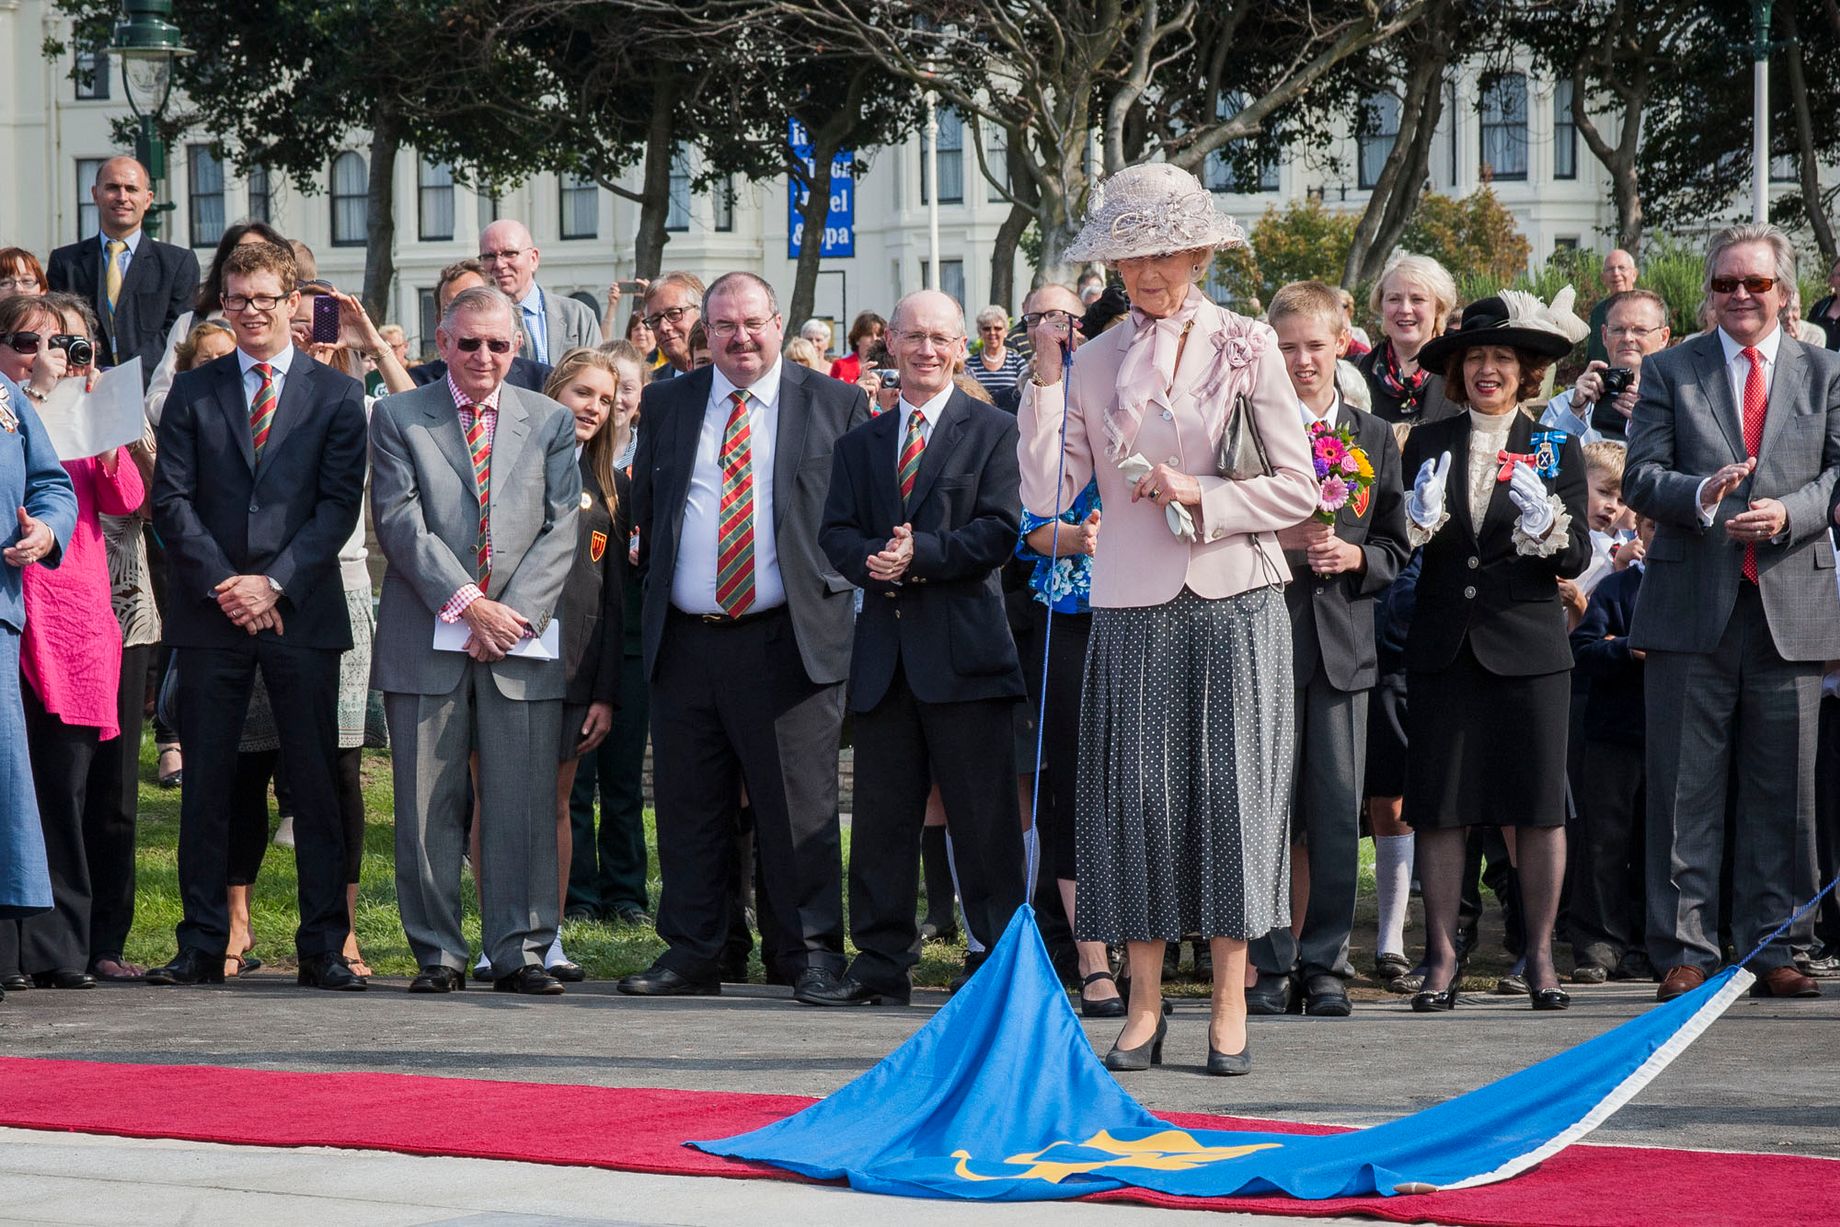 Princess Alexandra made a royal visit to Southport on Thursday, September 11, 2014, to officially unveil the completion of the £5.5million transformation of King's Gardens. Photo by Tarleton Photography